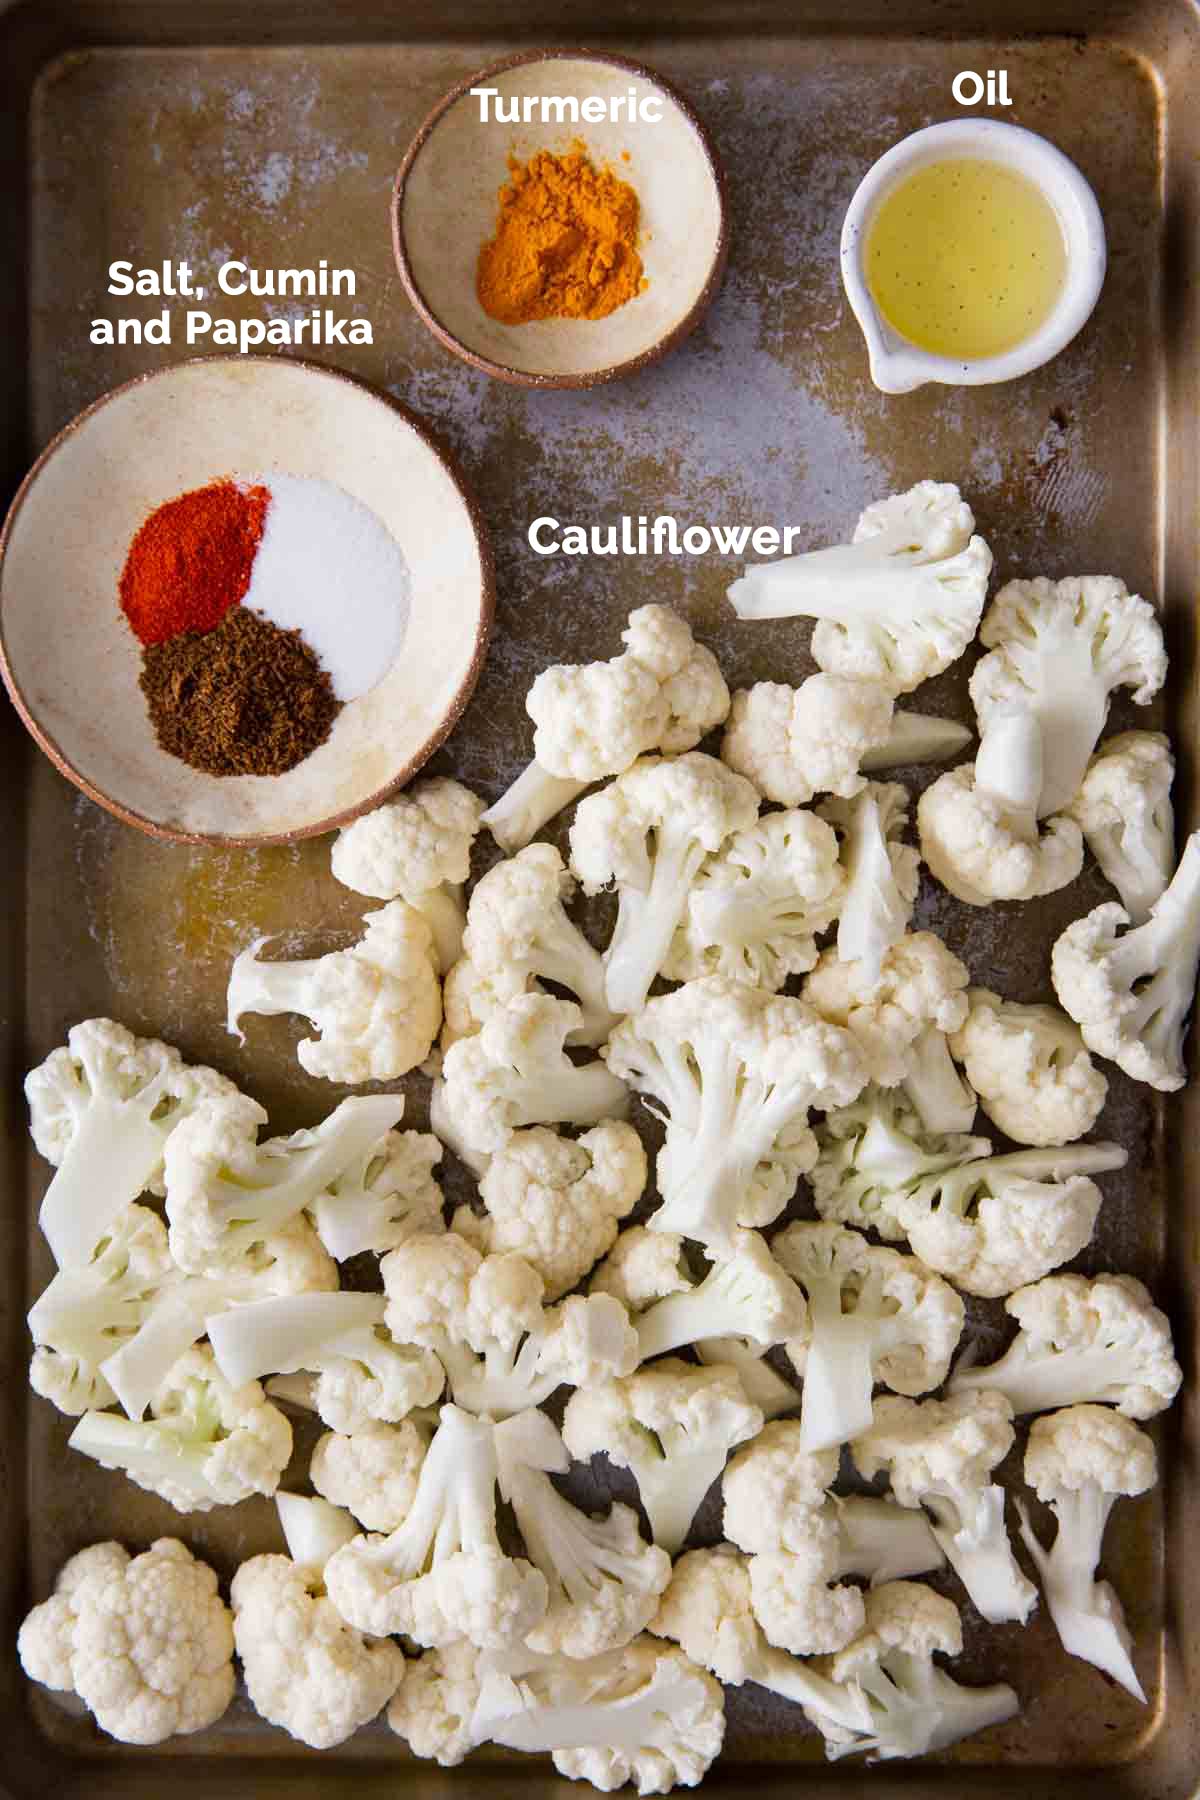 Ingredients to prepare turmeric roasted cauliflower are laid on a flat baking tray.